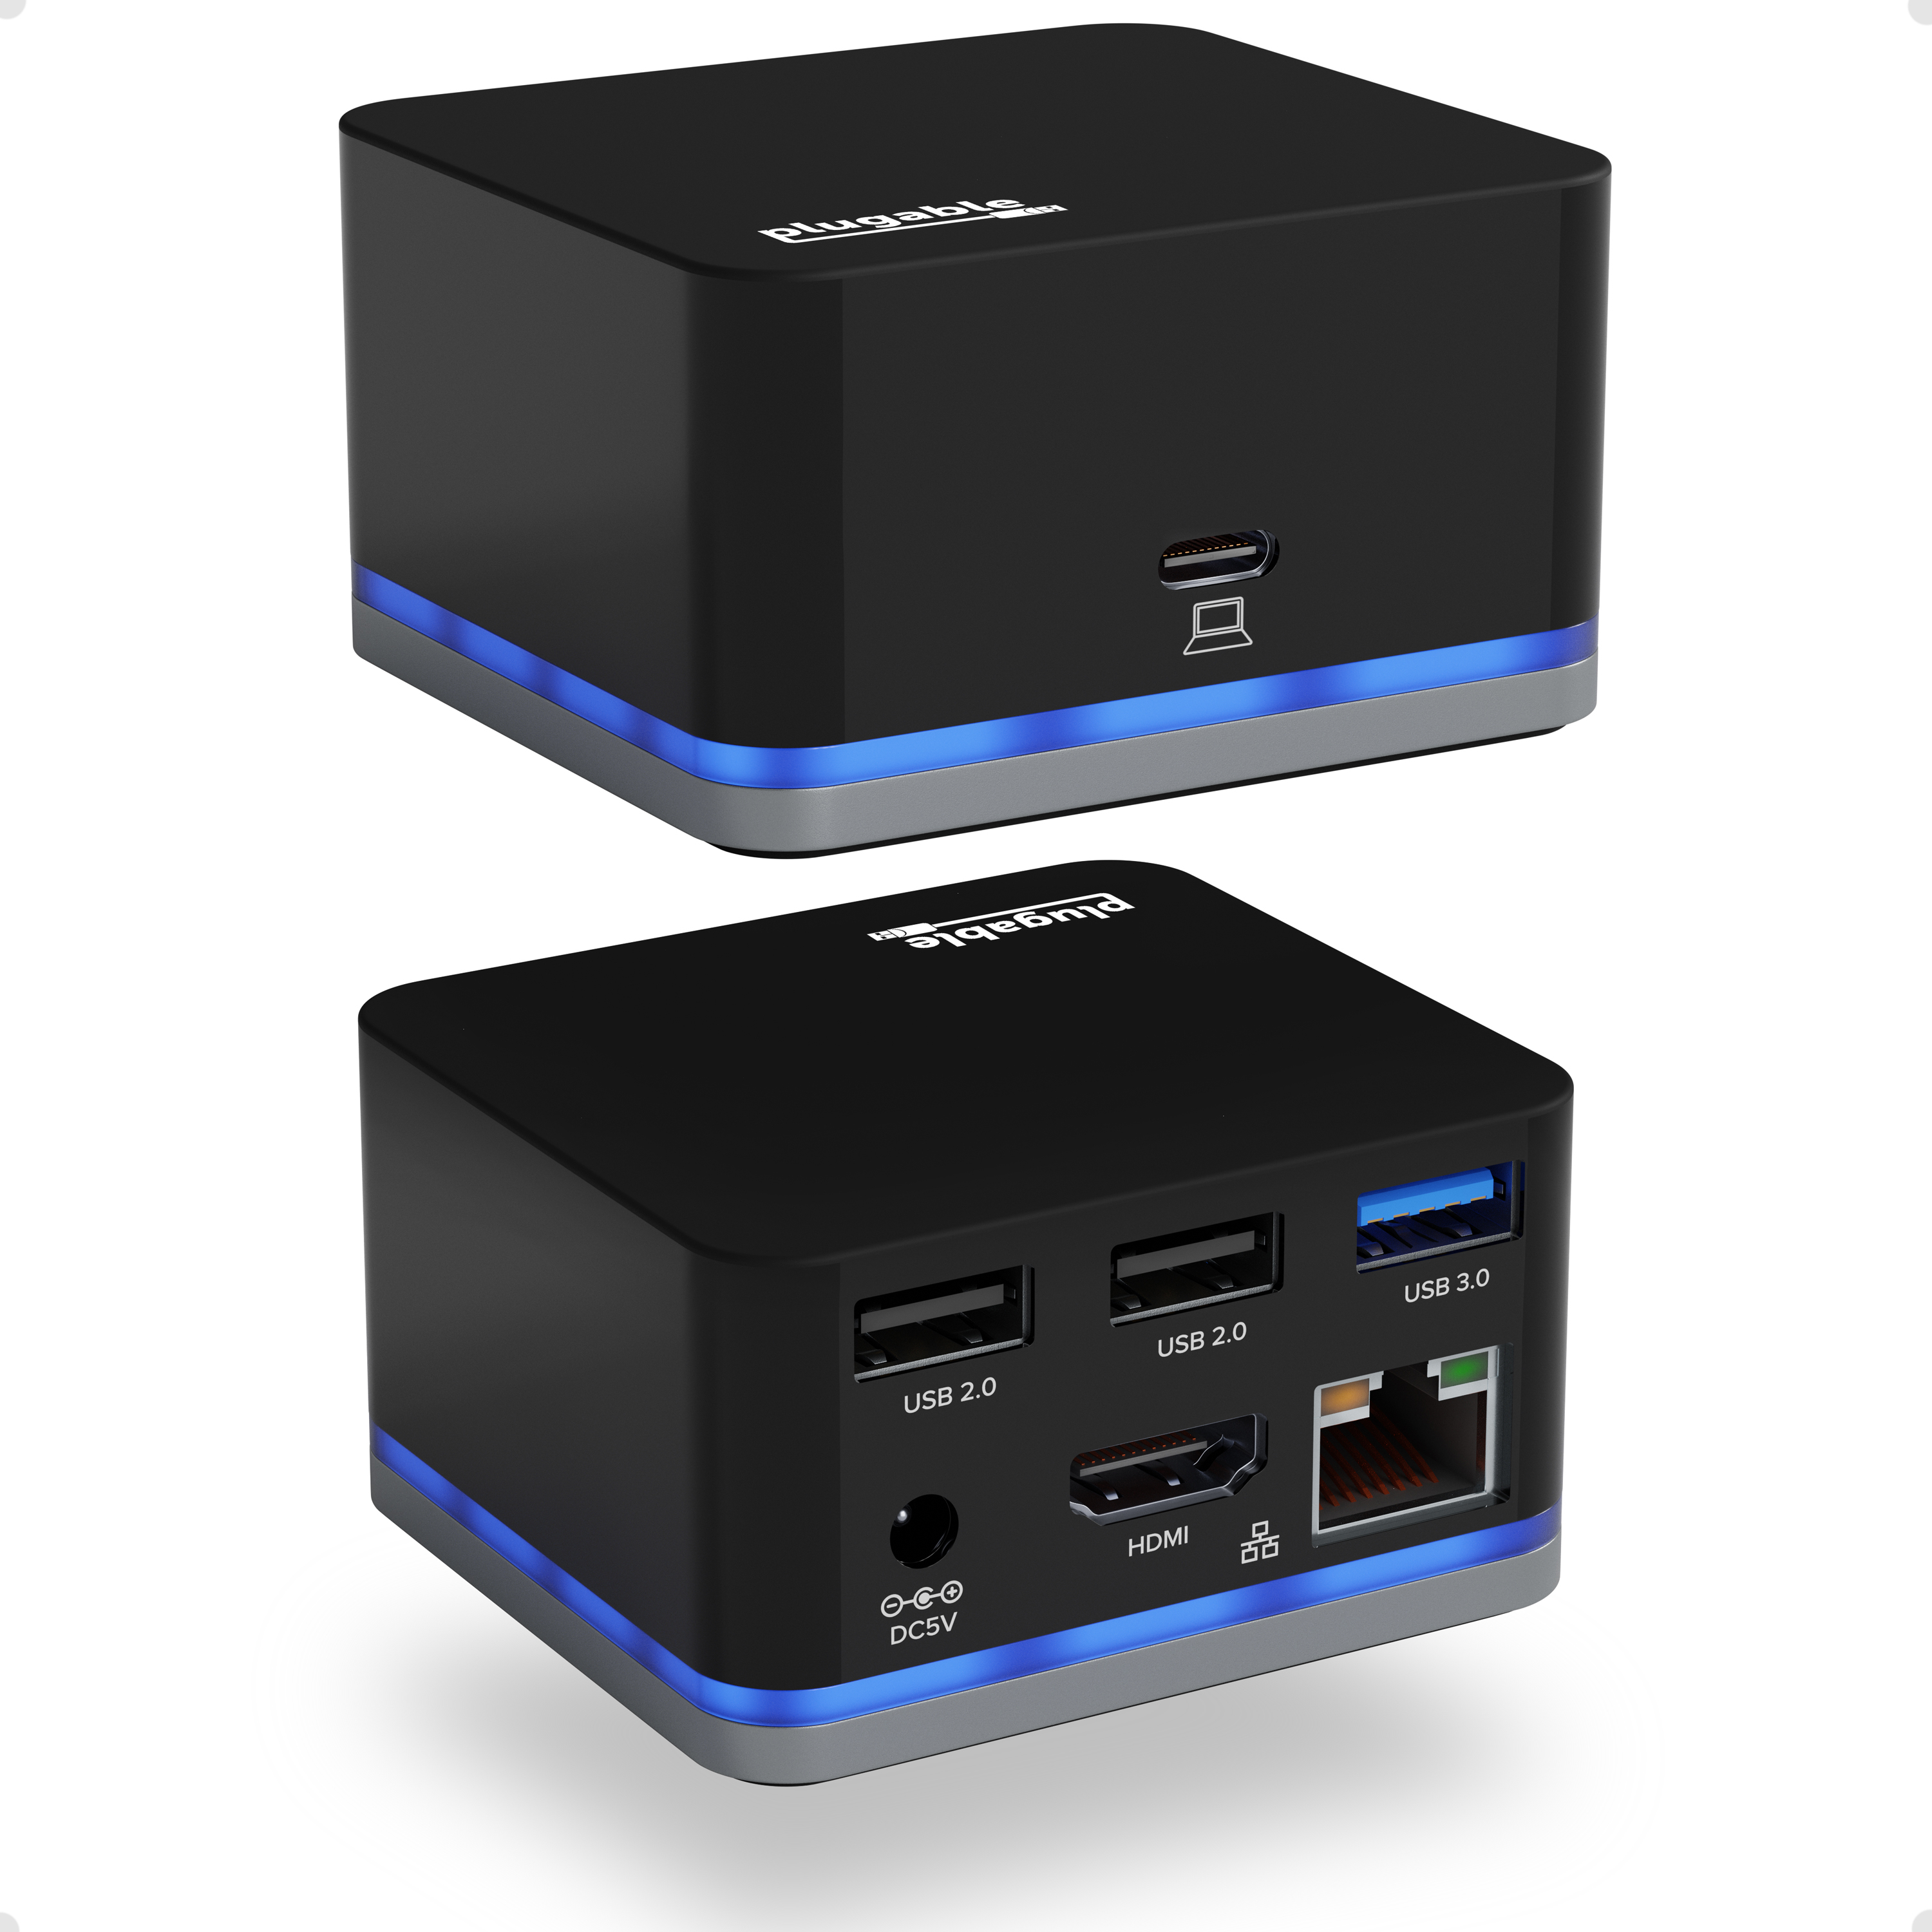 Plugable Phone Cube Compatible with Samsung DeX Dock, DeX Station, DeX Pad, Galaxy Note 9, S9, S9 Plus, S8, S8 Plus, S10, Tab S5e - Transforms Your USB C Phone to a Desktop with HDMI, USB and Ethernet - image 1 of 8